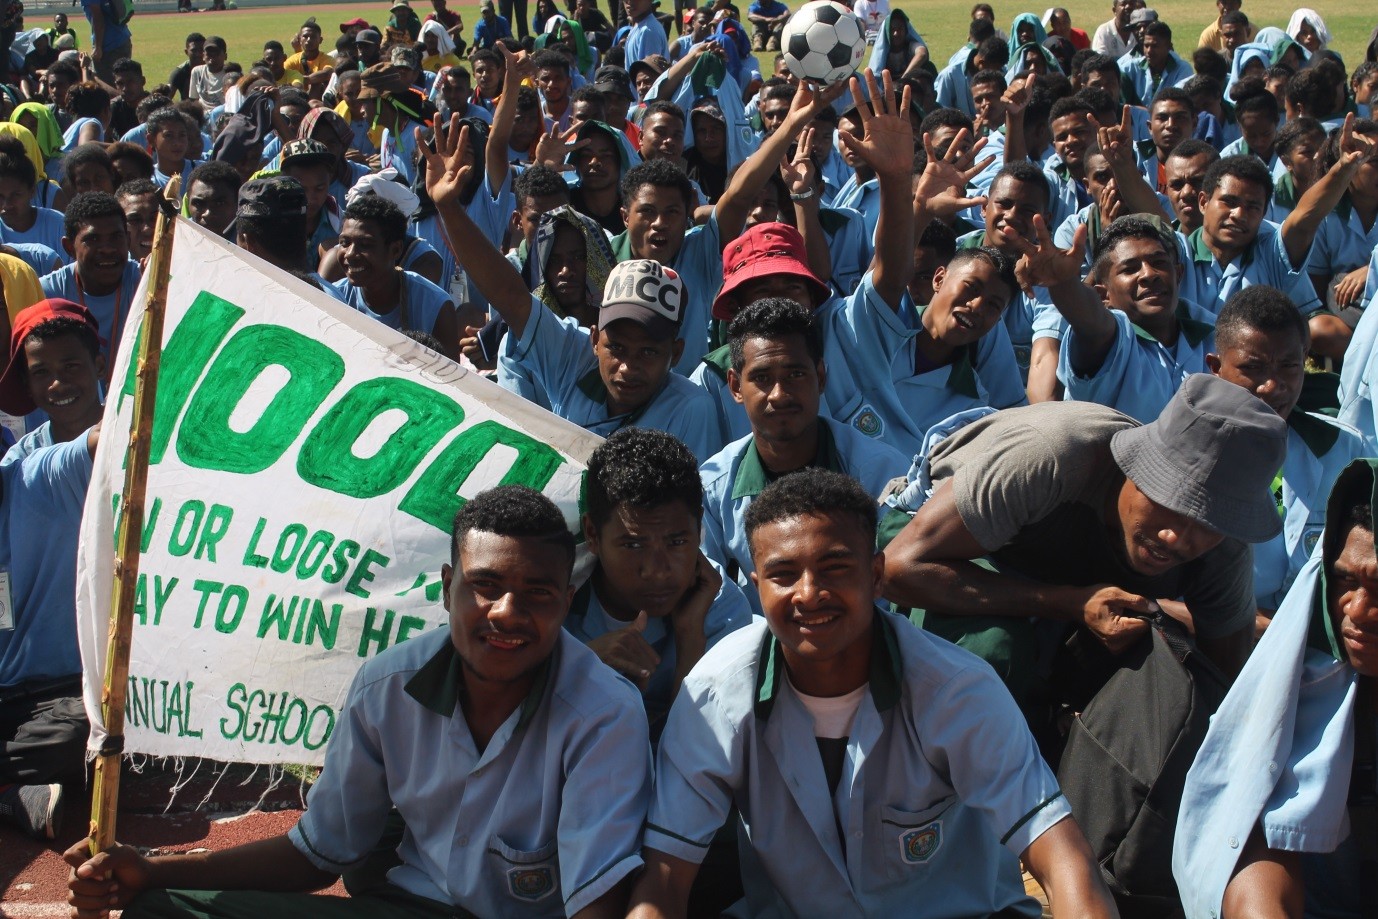 Hood Bay Day High School students posing for the camera during the official opening ceremony of the 6th Central School carnival at Sir John Guise stadium in Port Moresby - Picture by John Iamo, CPG Media